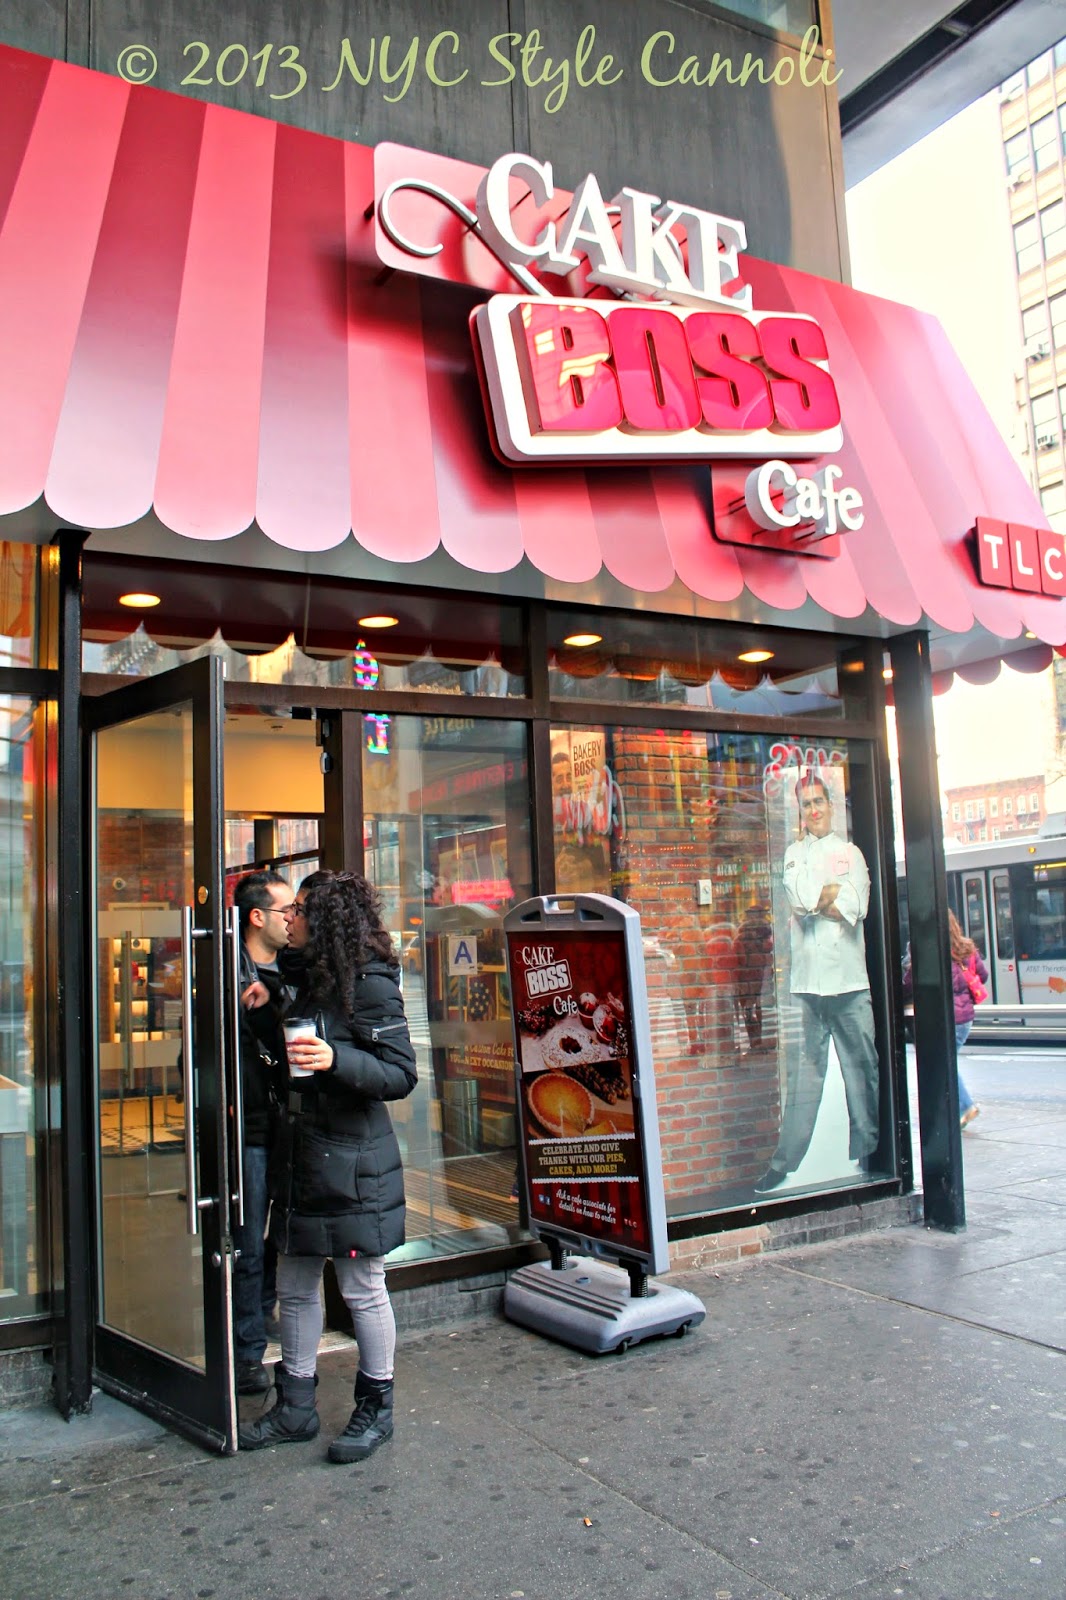 Rute Romantik Nuværende NYC, Style & a little Cannoli: The Cake Boss Cafe in New York City